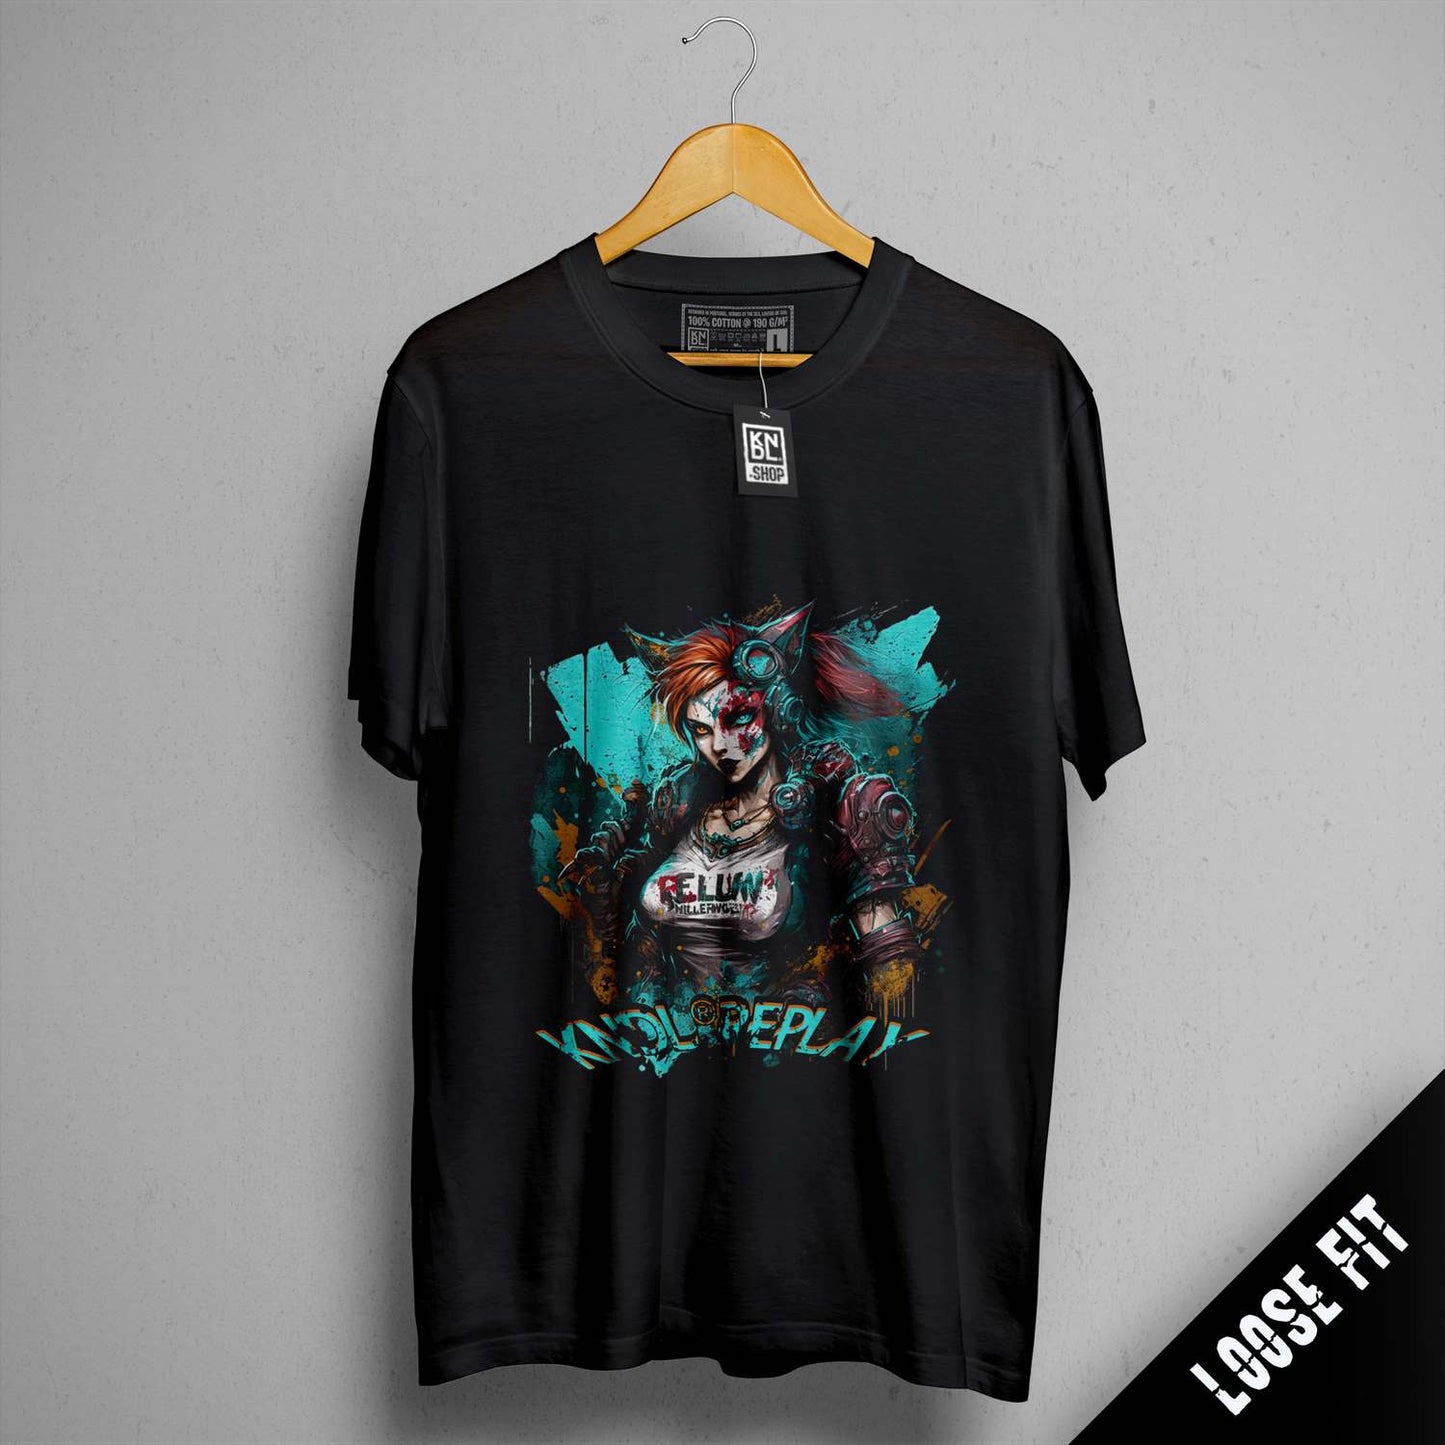 a black t - shirt with a picture of a clown on it